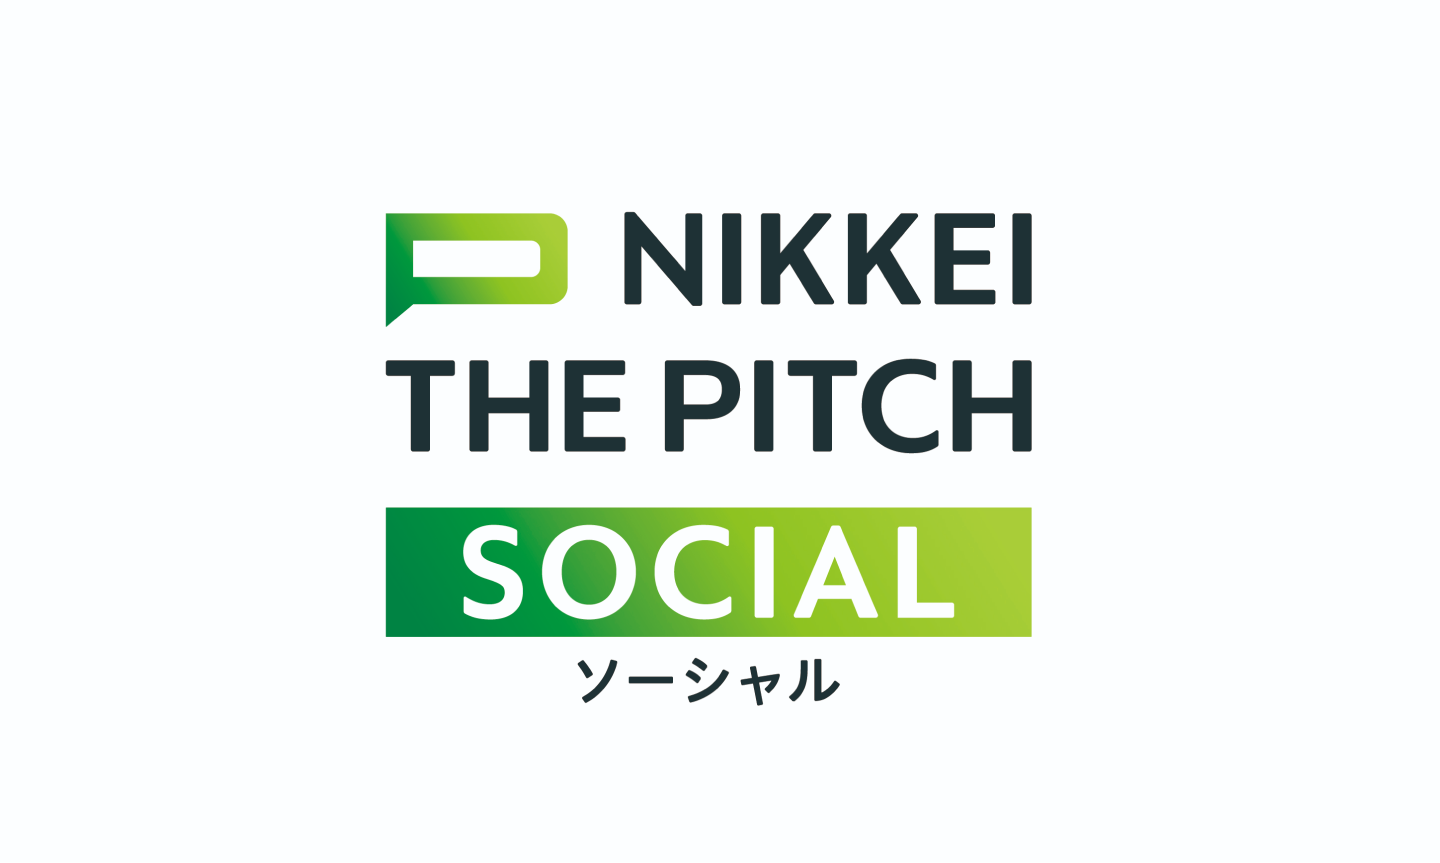 NIKKEI THE PITCH SOCIAL